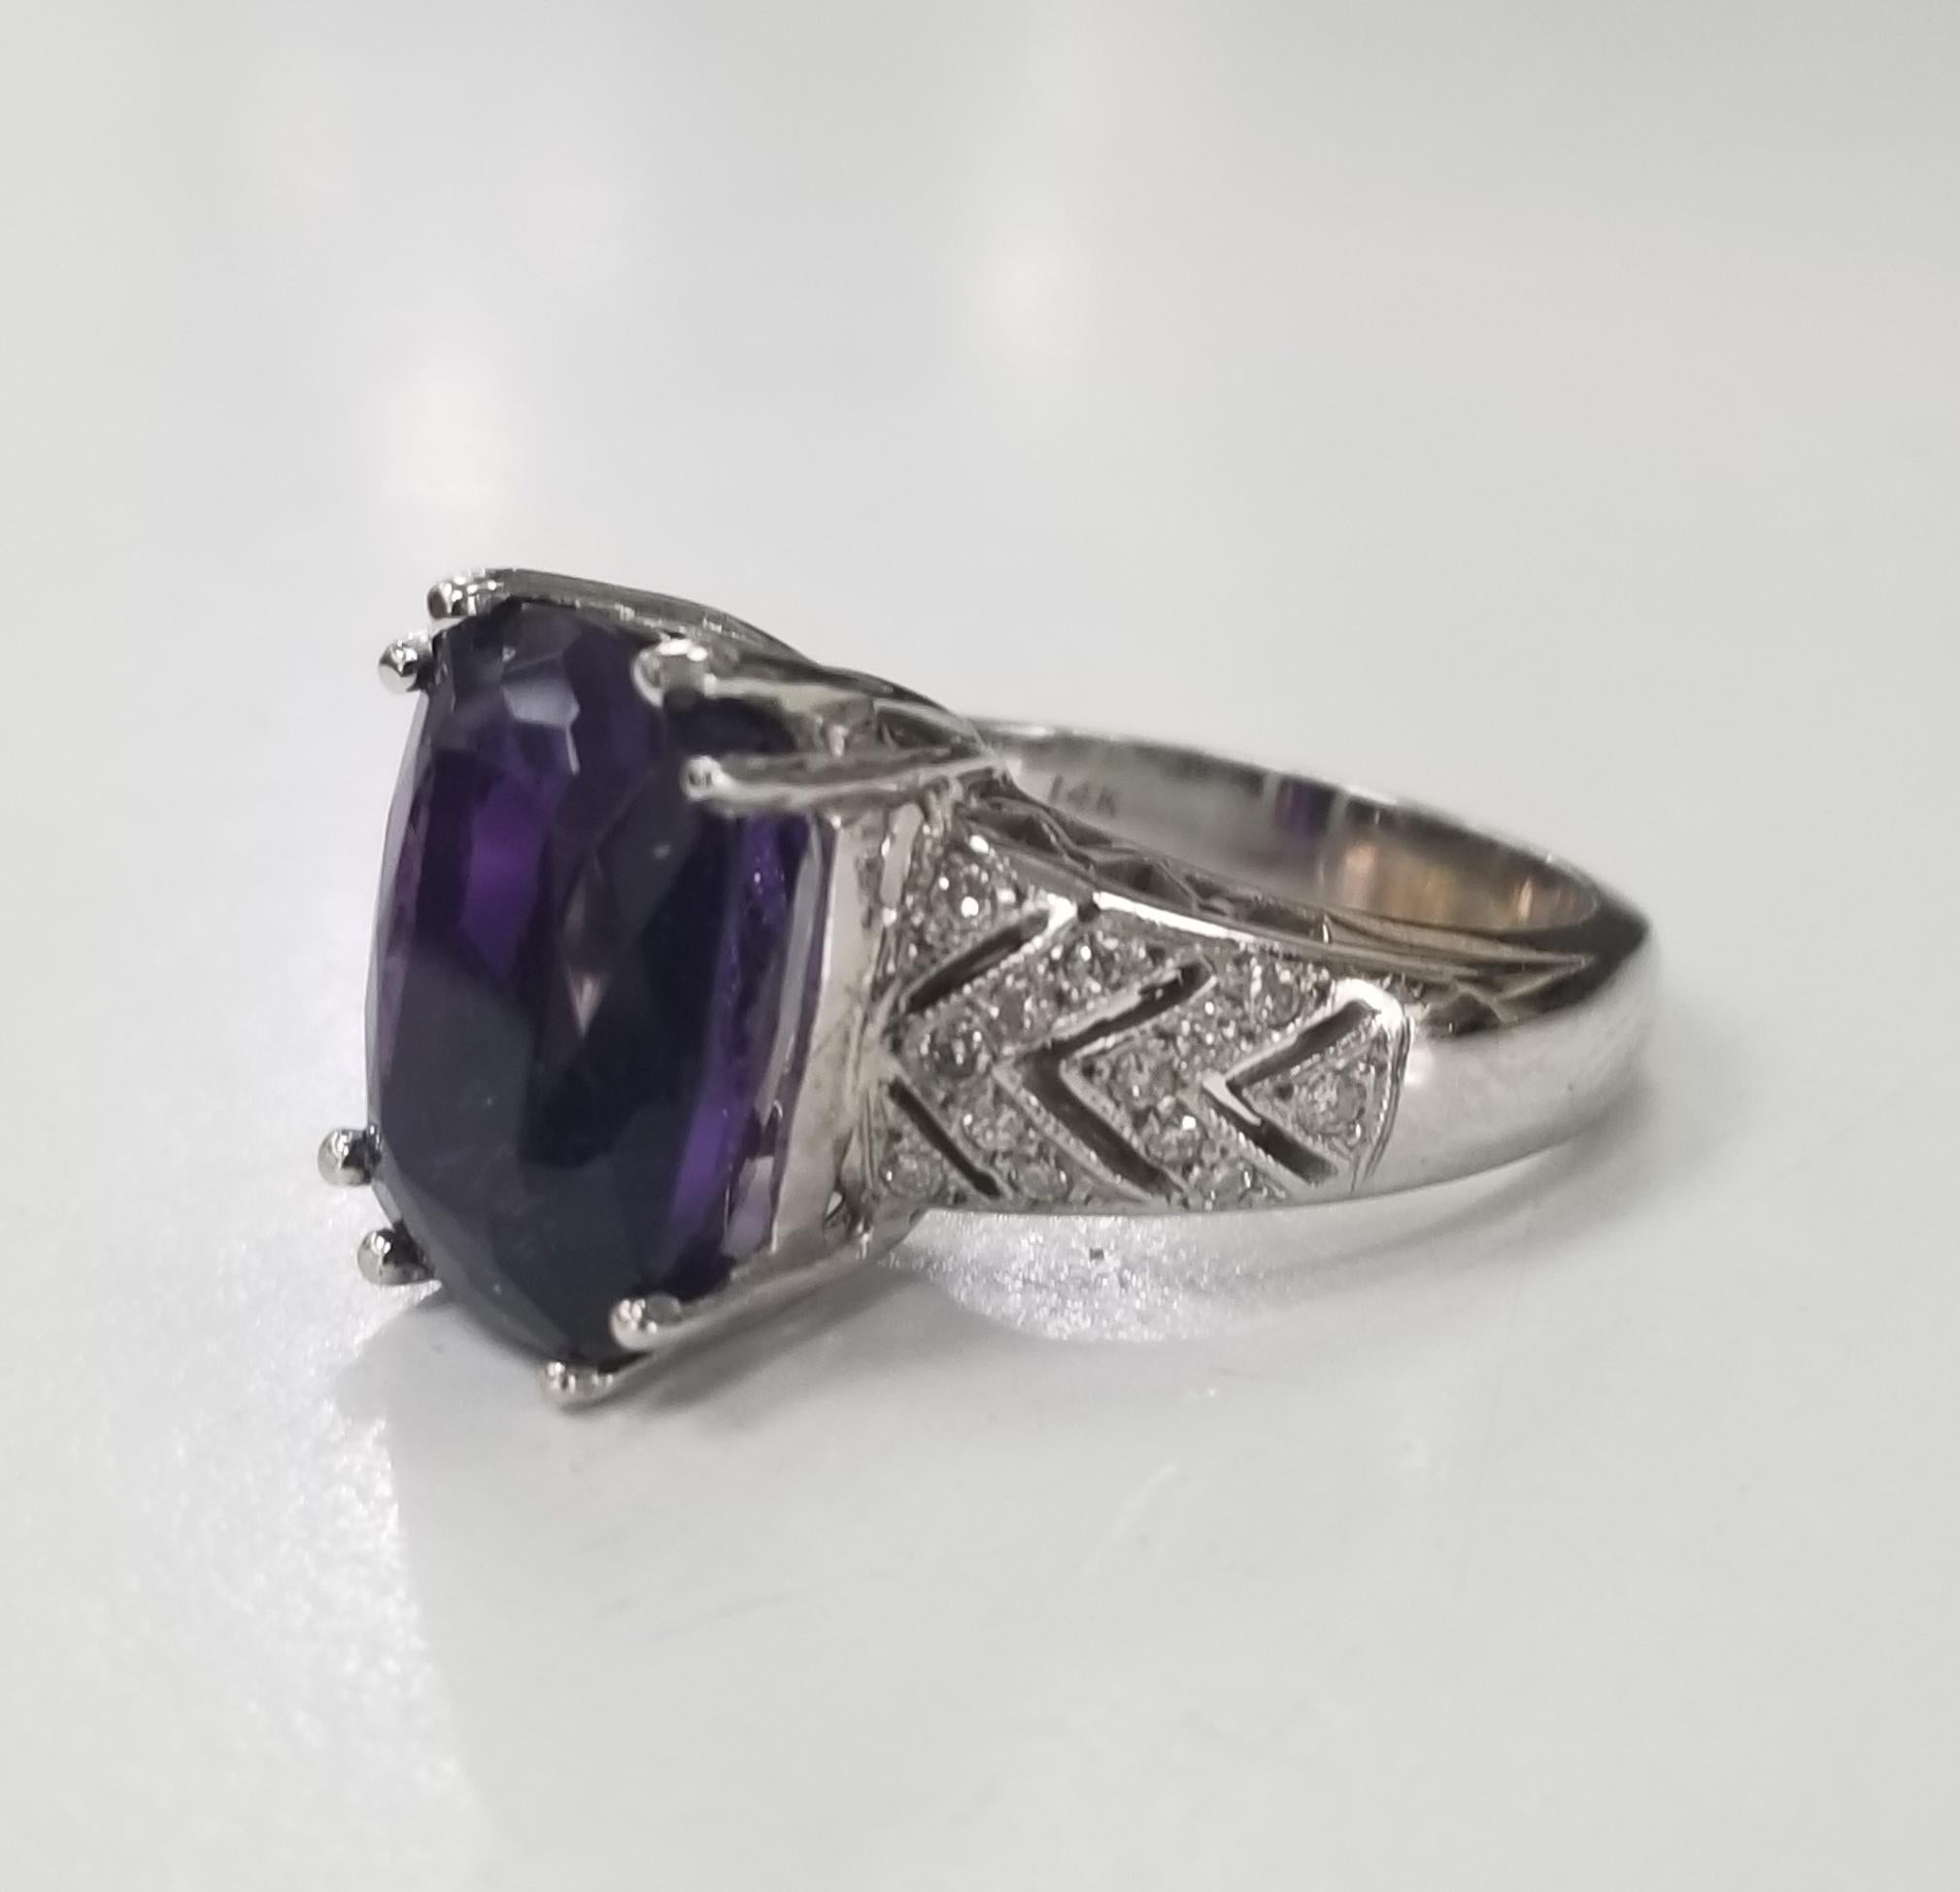 14k yellow gold Amethyst and diamond ring, containing 1 cushion cut amethyst weighing 7.94cts. and 26 round full cut diamonds of nice quality weighing .42pts. 